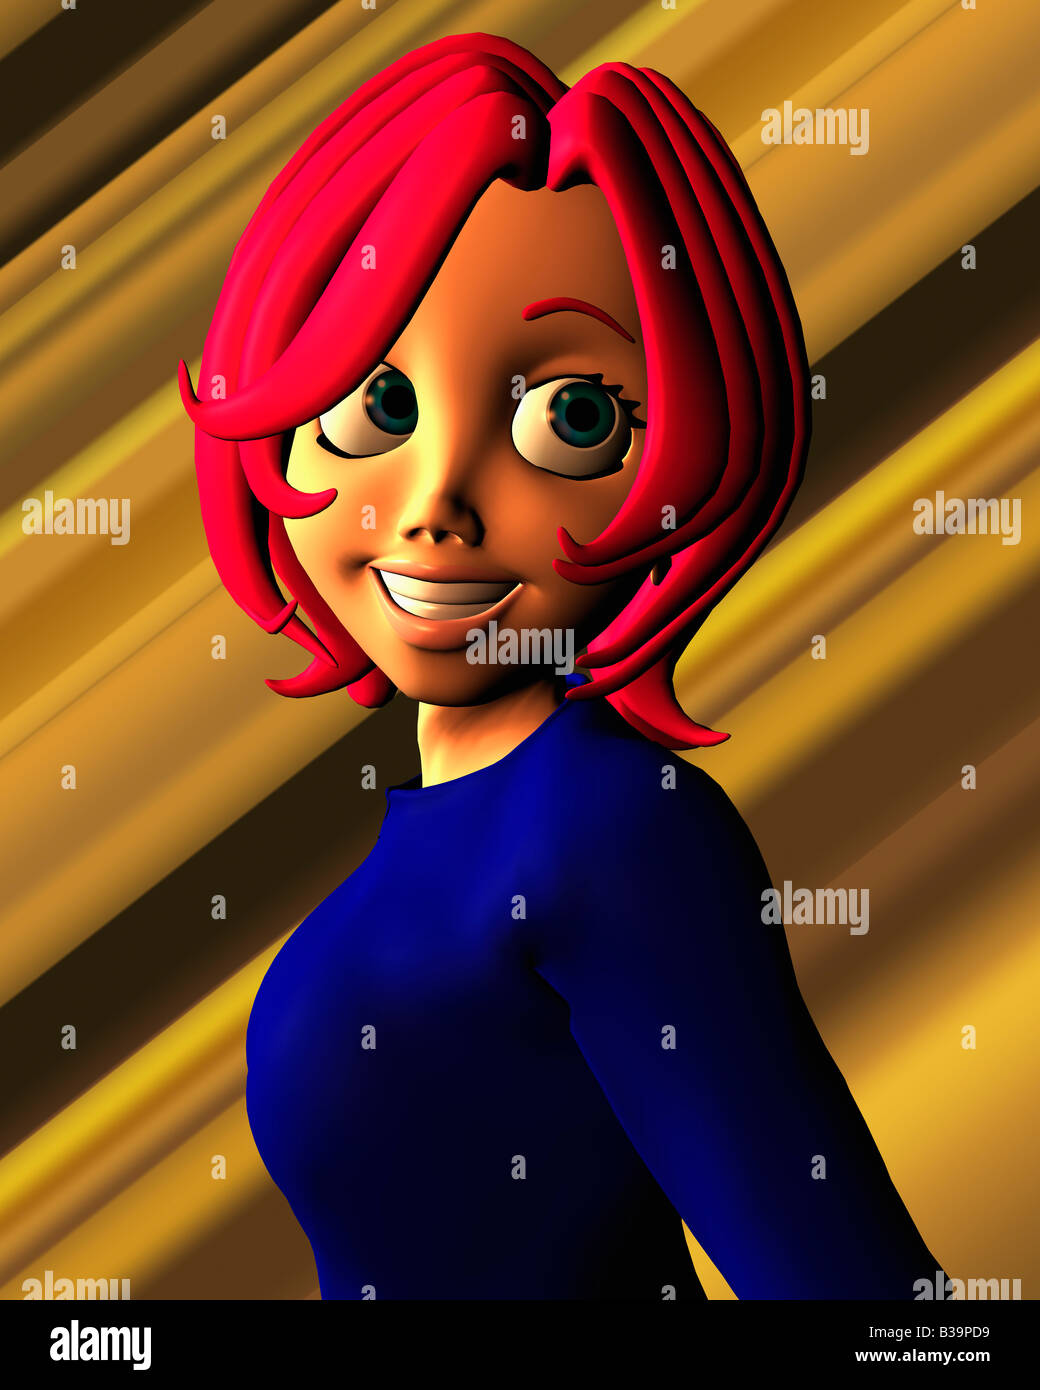 Cartoon Illustration Of A Teen Girl With A Toothy Smile Stock Photo